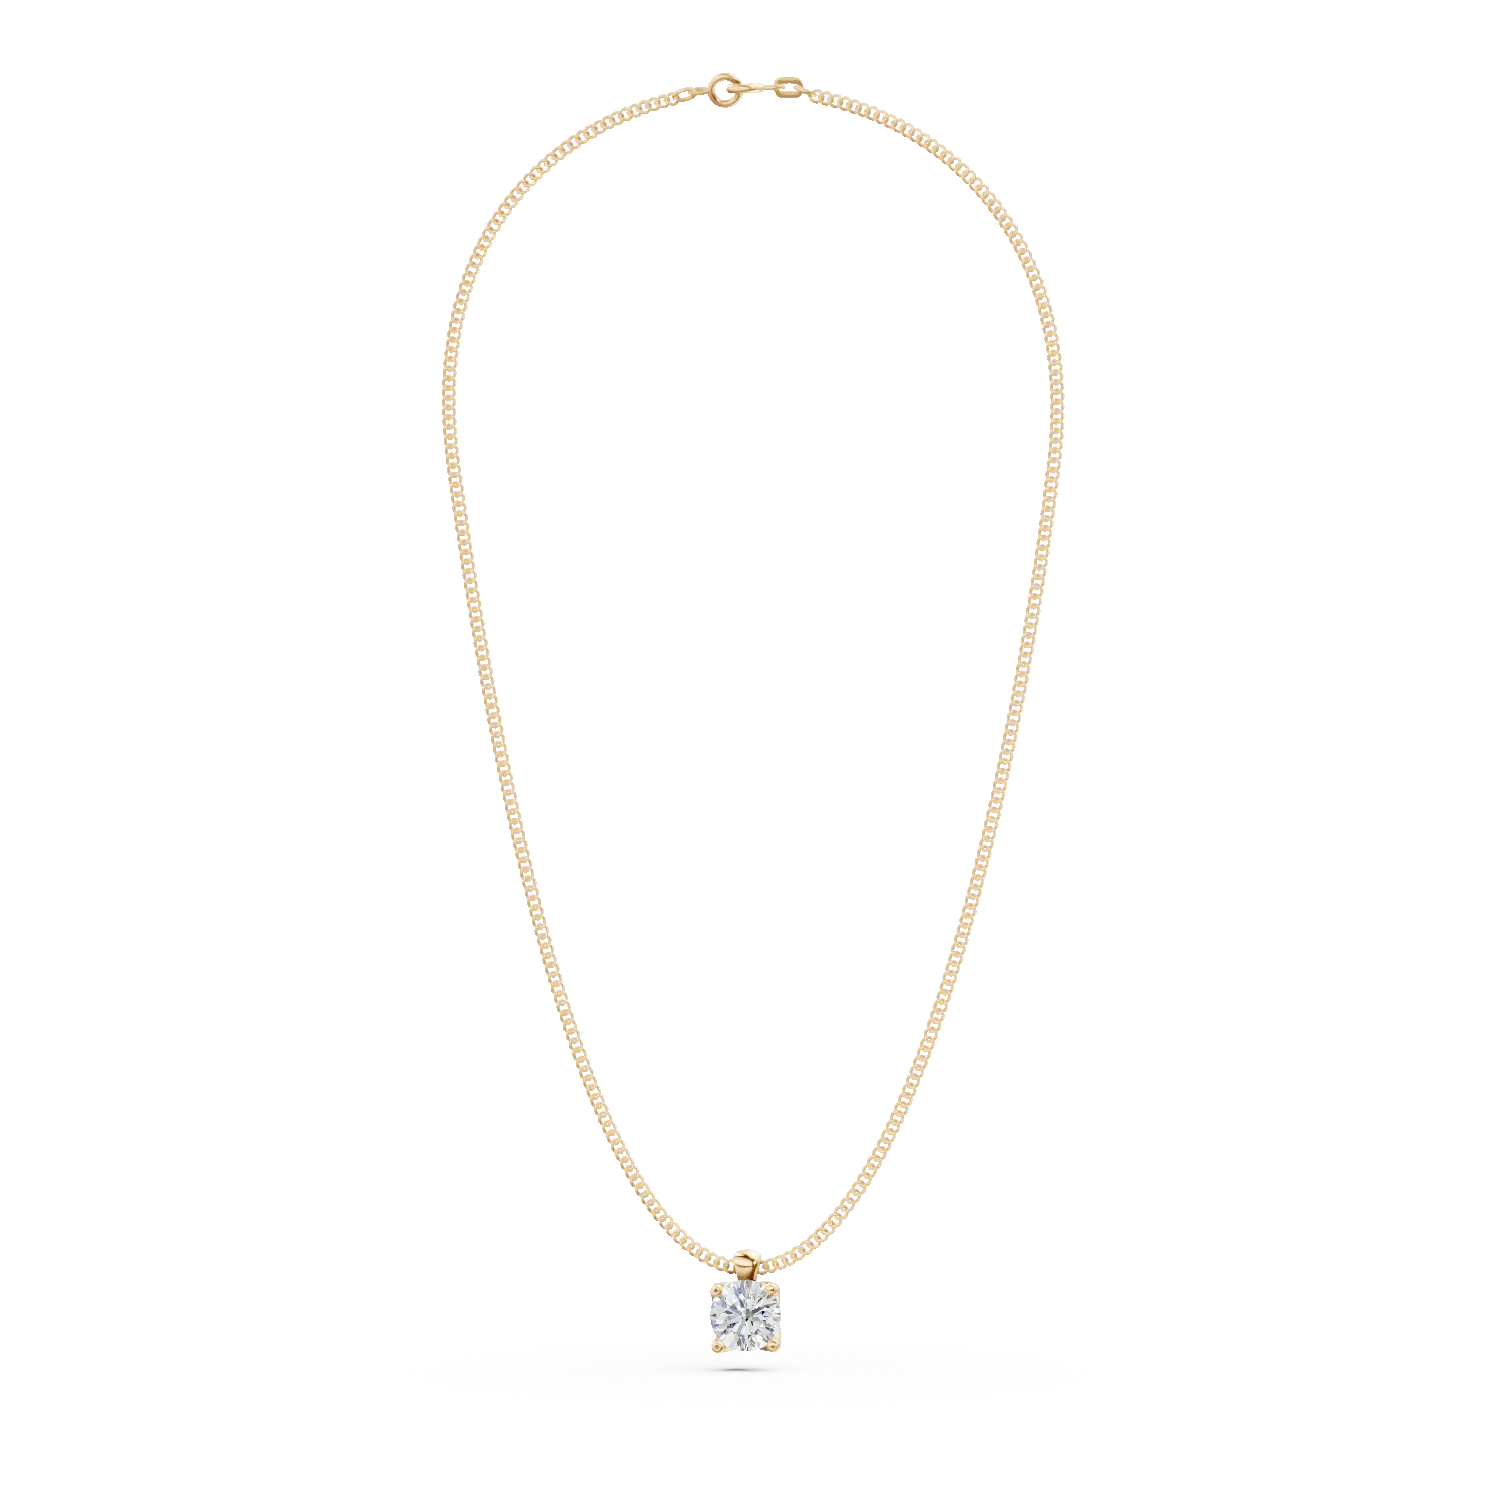 Yellow gold Lotus pendant necklace with 0.2ct solitaire lab grown diamond